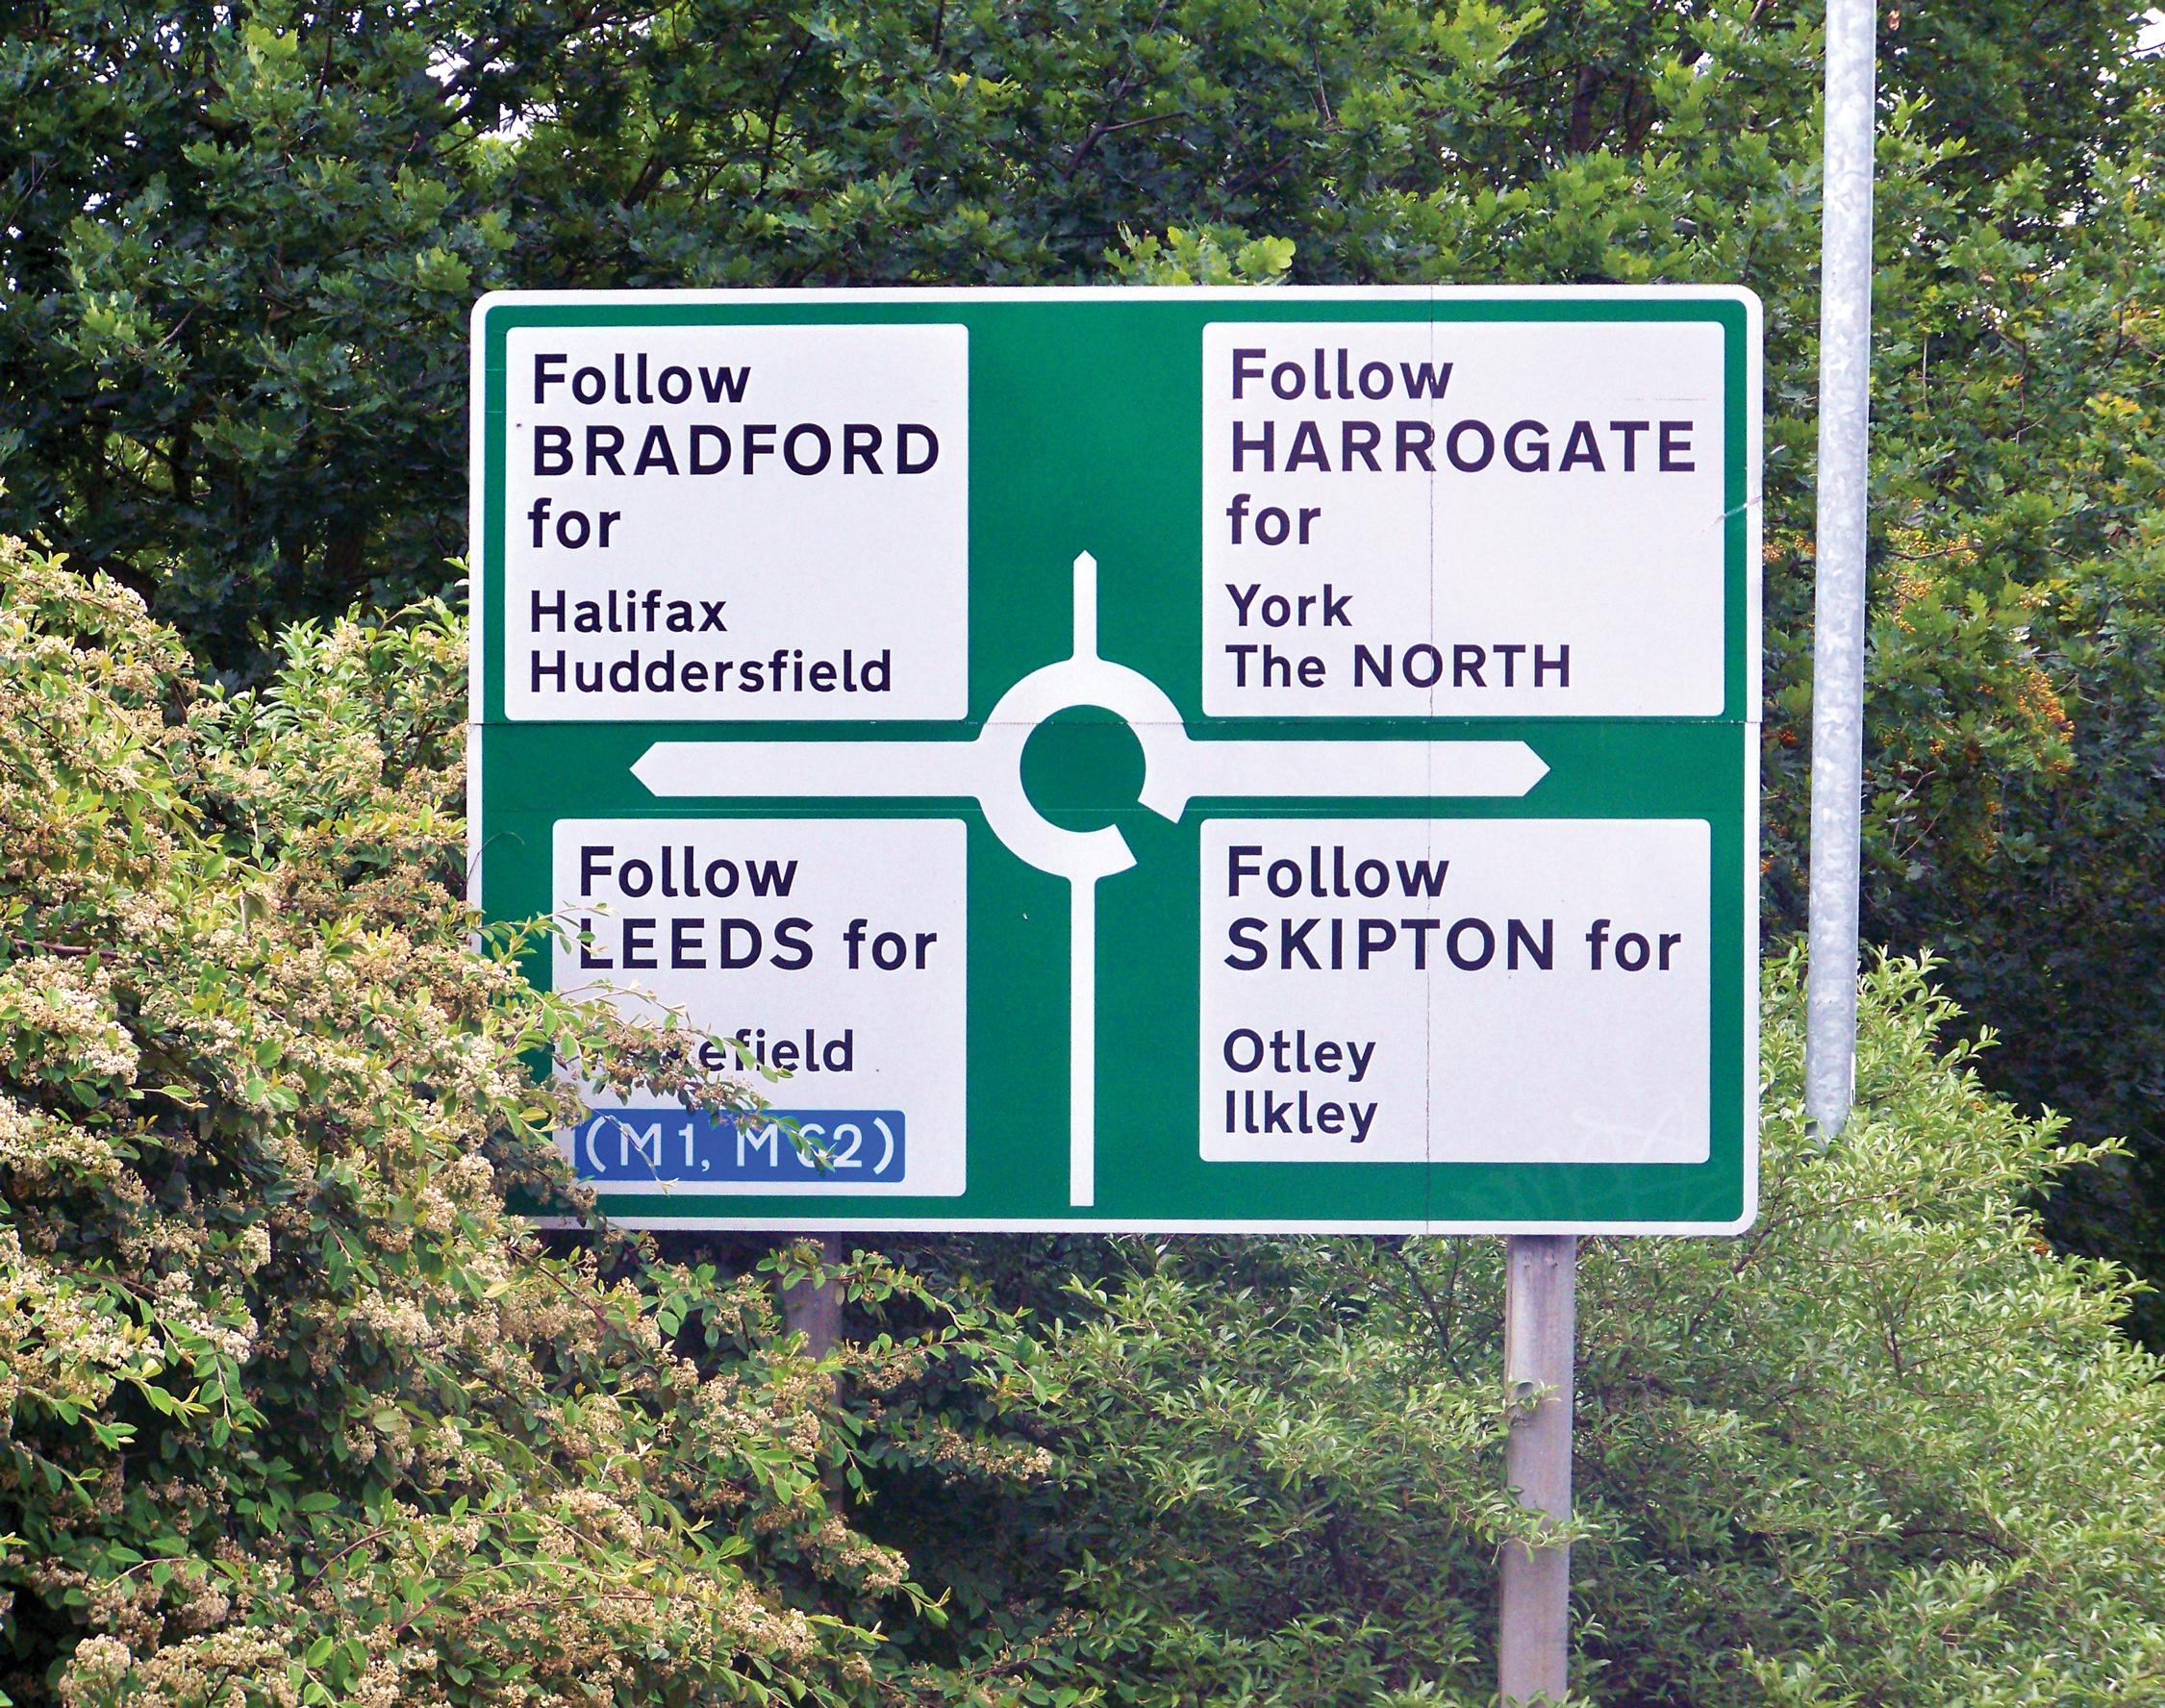 Which direction will Yorkshire’s transport governance go?